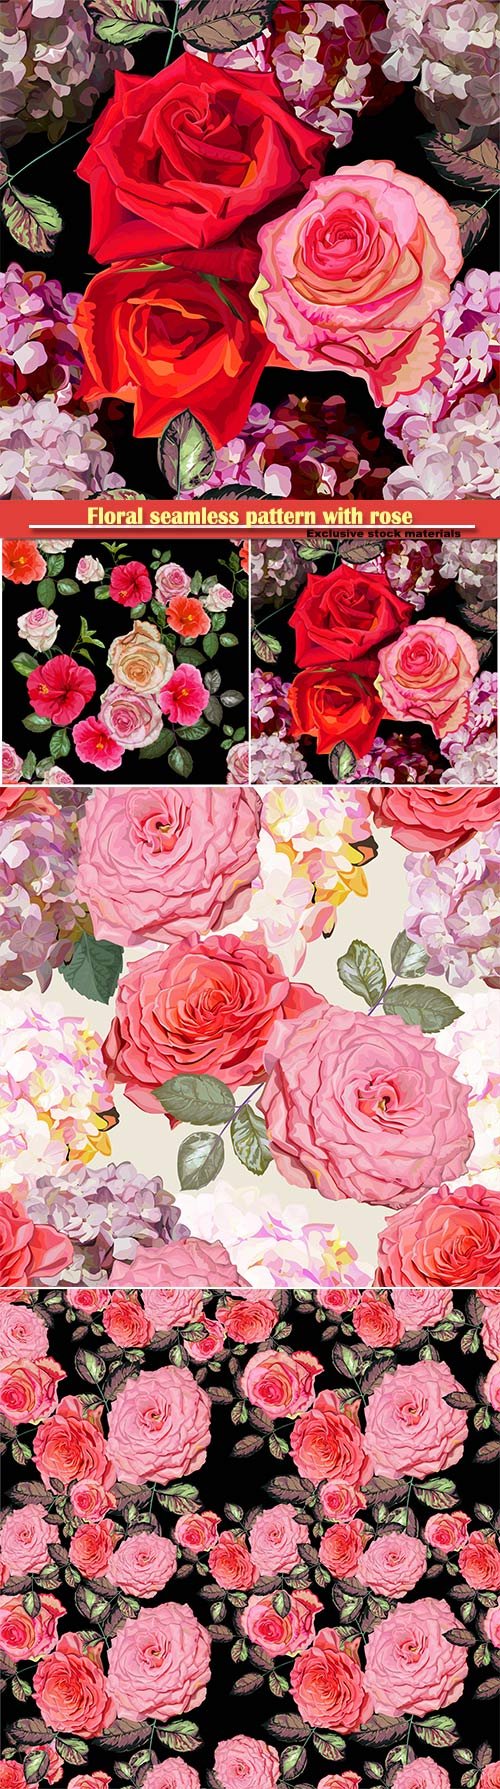 Floral seamless pattern with rose and hydrangea vector illustration